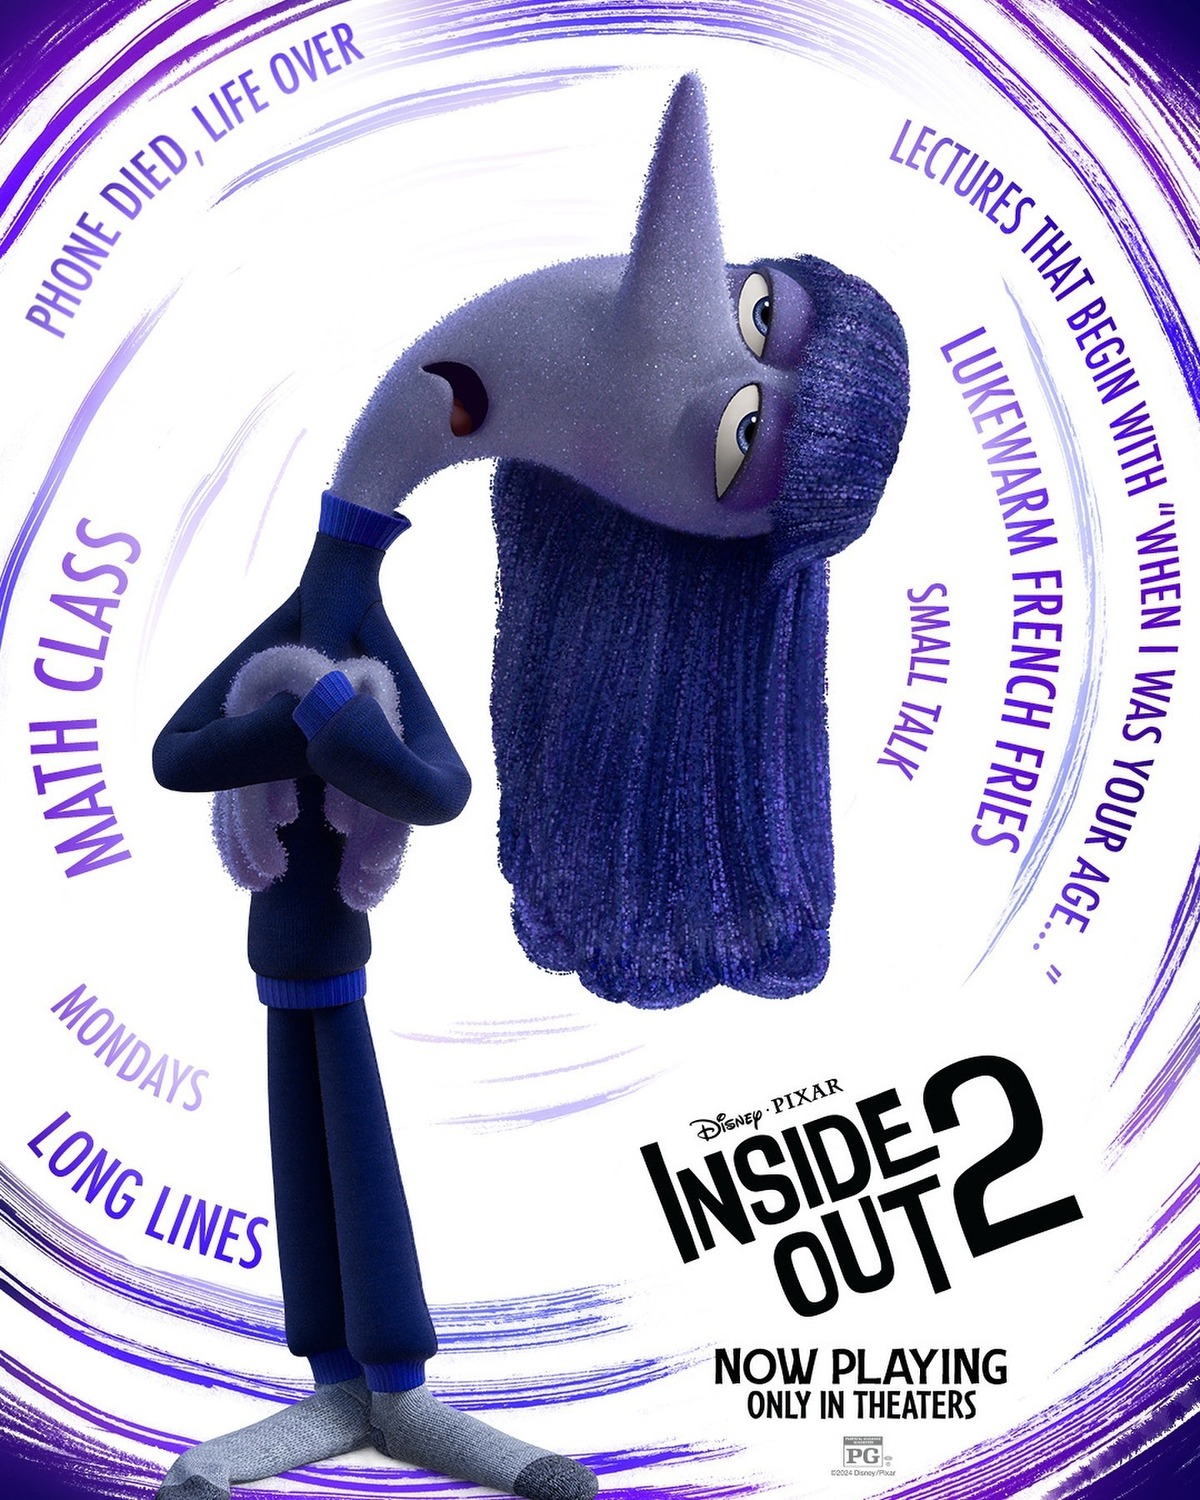 Extra Large Movie Poster Image for Inside Out 2 (#25 of 27)